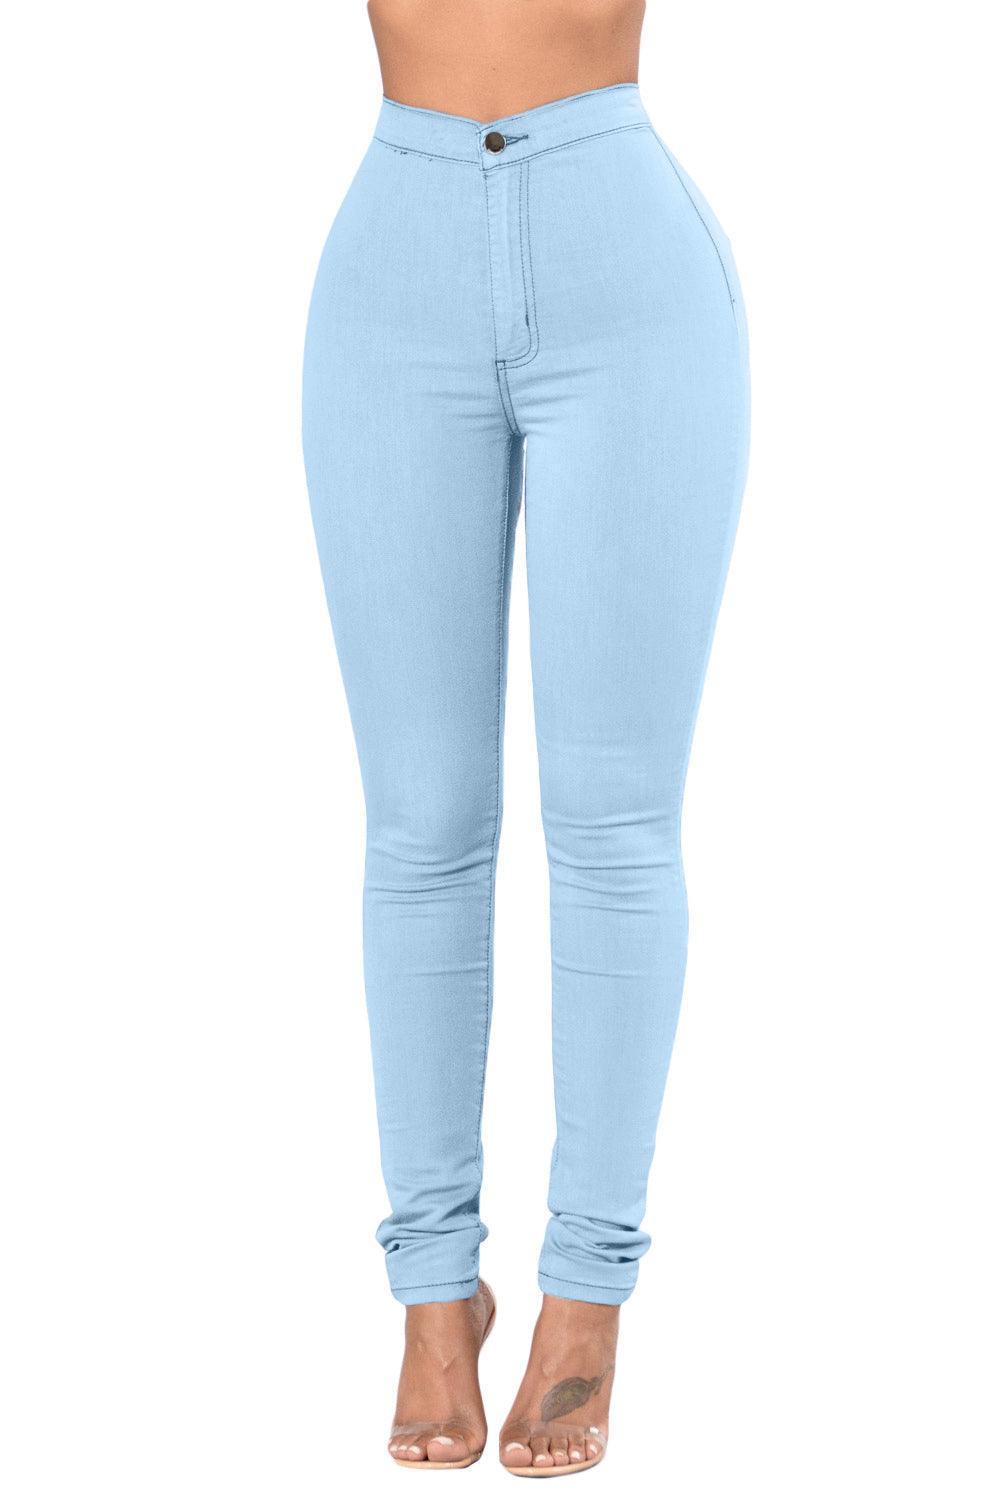 High Waist Skinny Jeans with Round Pockets - L & M Kee, LLC